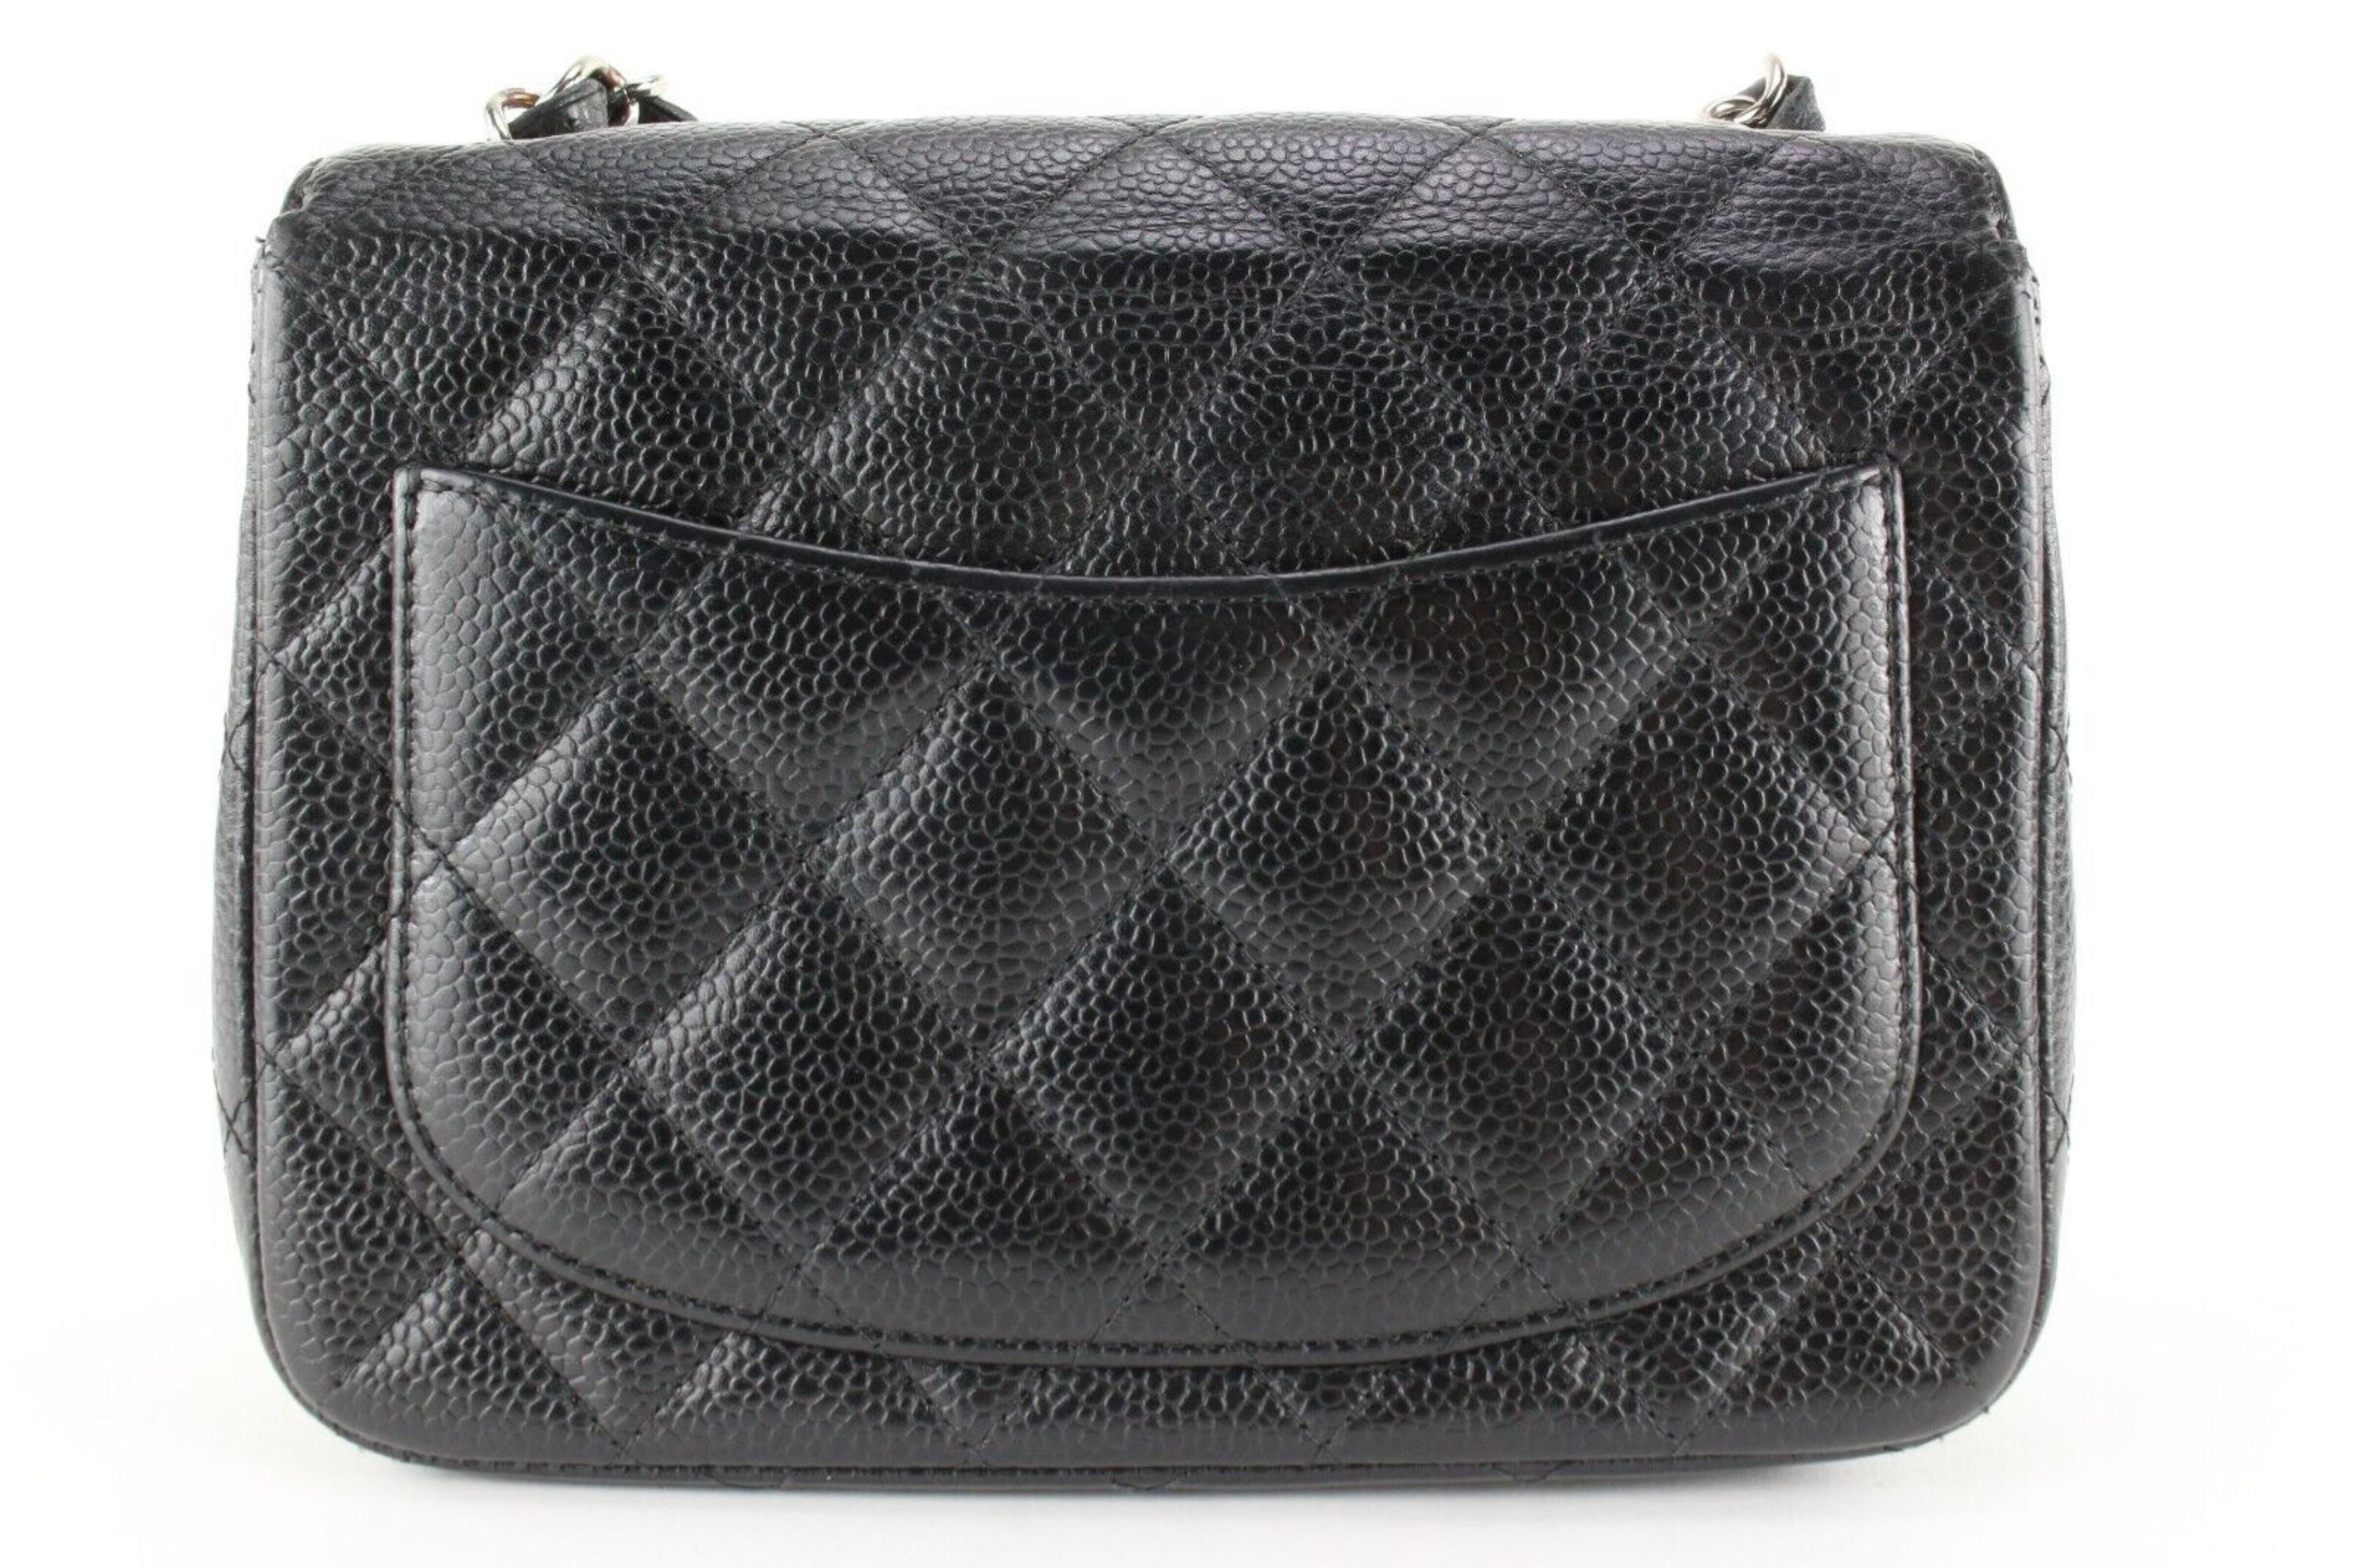 Chanel Black Quilted Caviar Leather Mini Square Classic Flap SHW RARE 19c26a For Sale 2